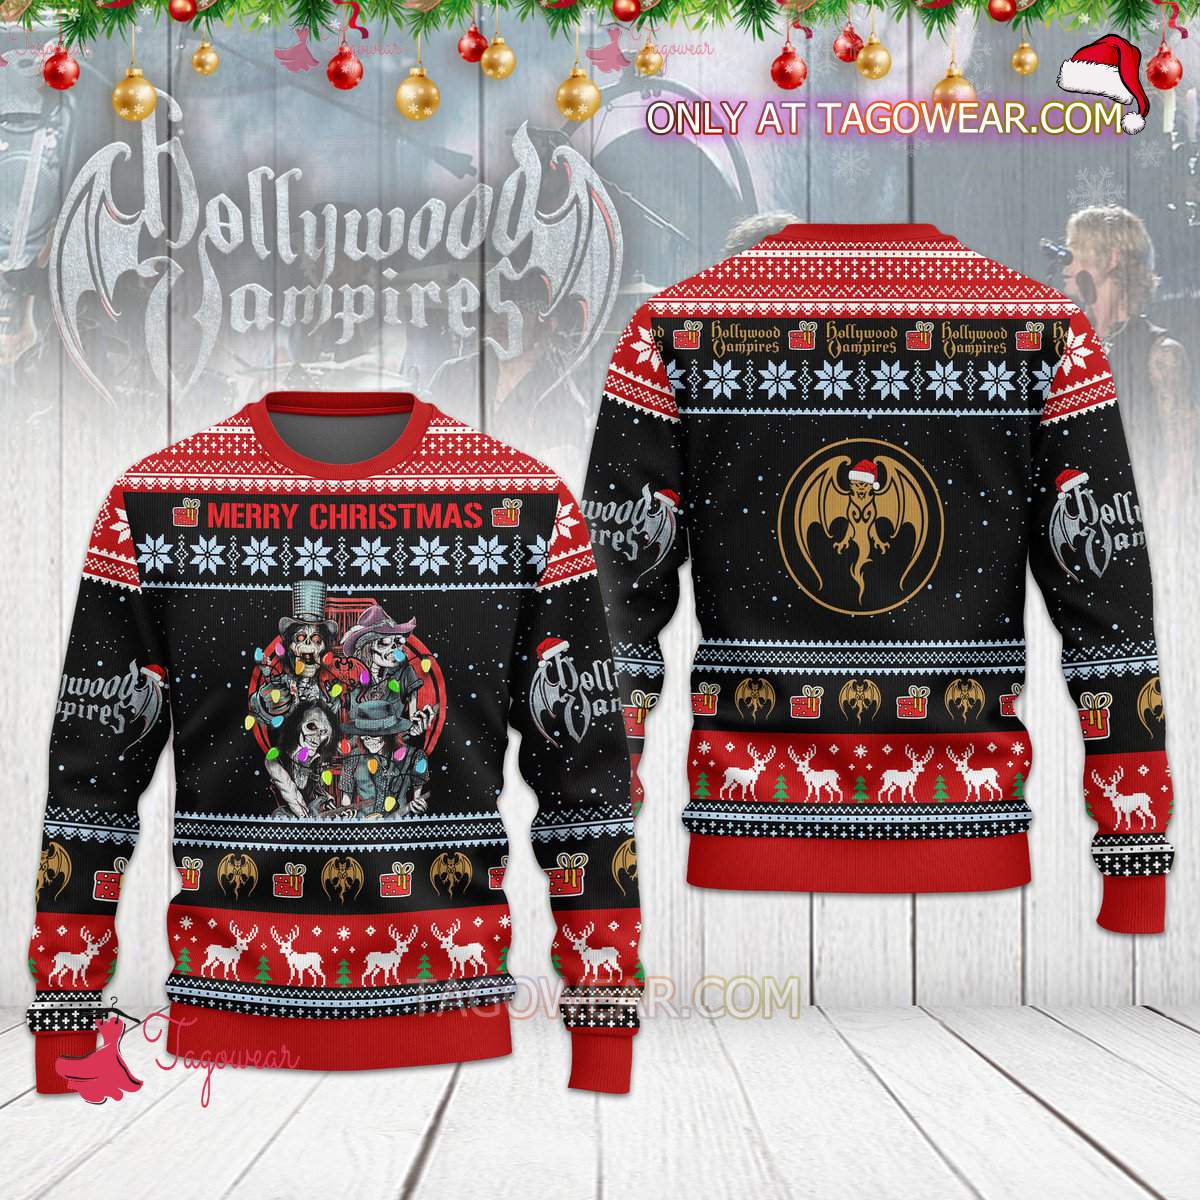 Hollywood Vampires Merry Christmas Sweater